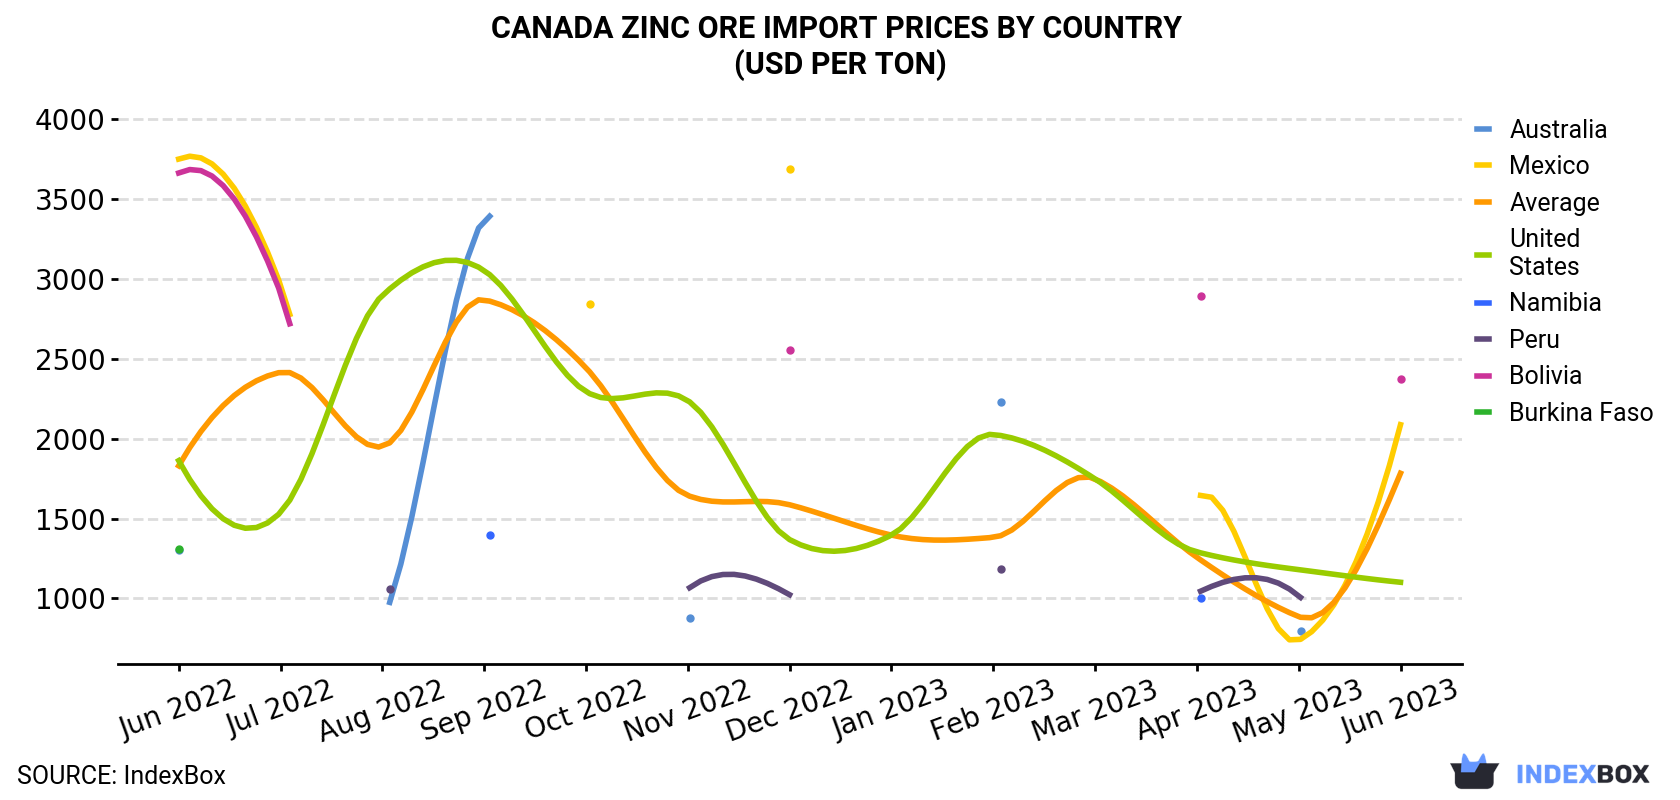 Canada Zinc Ore Import Prices By Country (USD Per Ton)